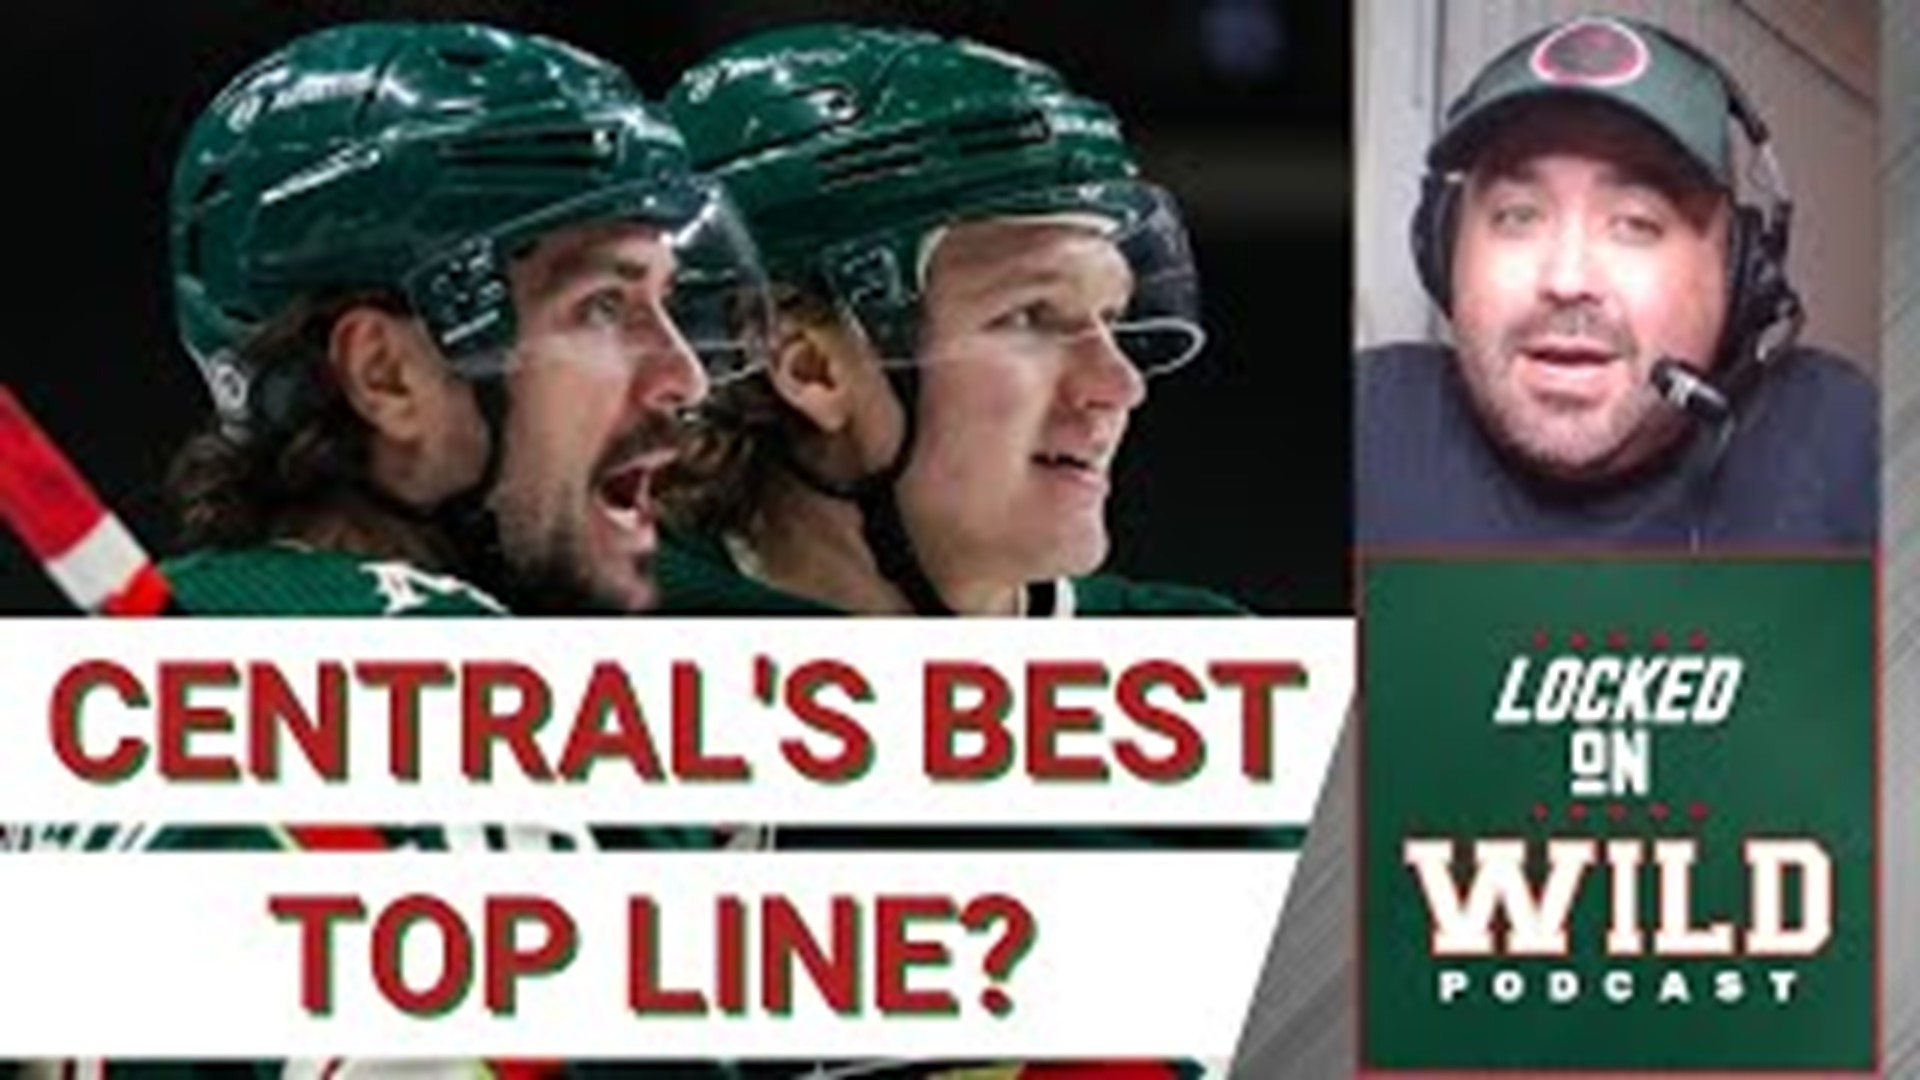 Where does the Minnesota Wild Top Line rank in the Central Division?